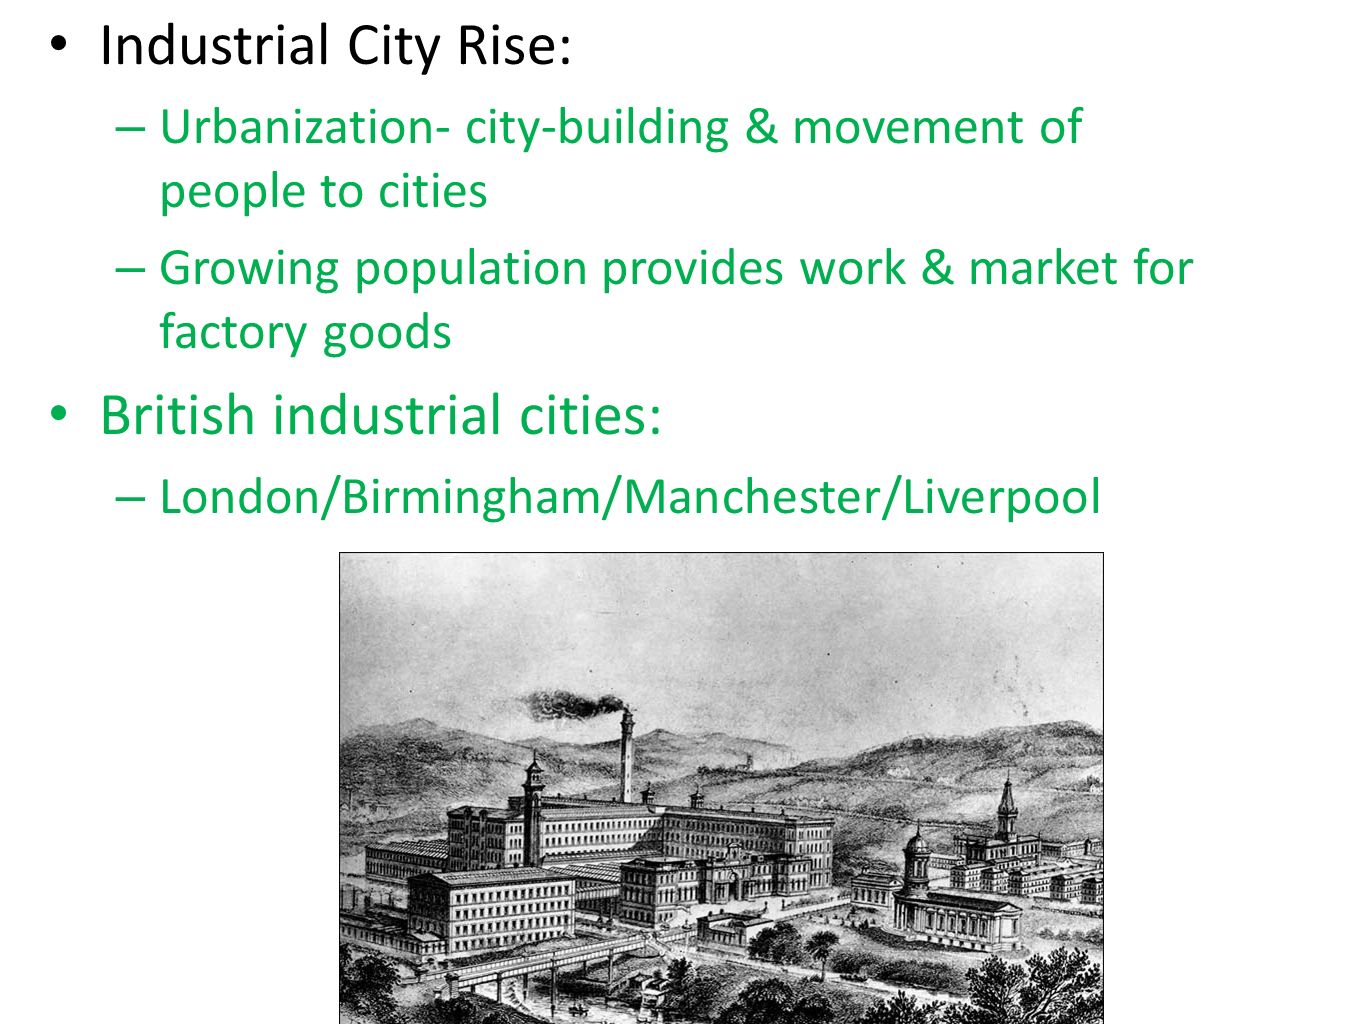 Industrial City Rise: – Urbanization- city-building & movement of people to cities – Growing population provides work & market for factory goods British industrial cities: – London/Birmingham/Manchester/Liverpool